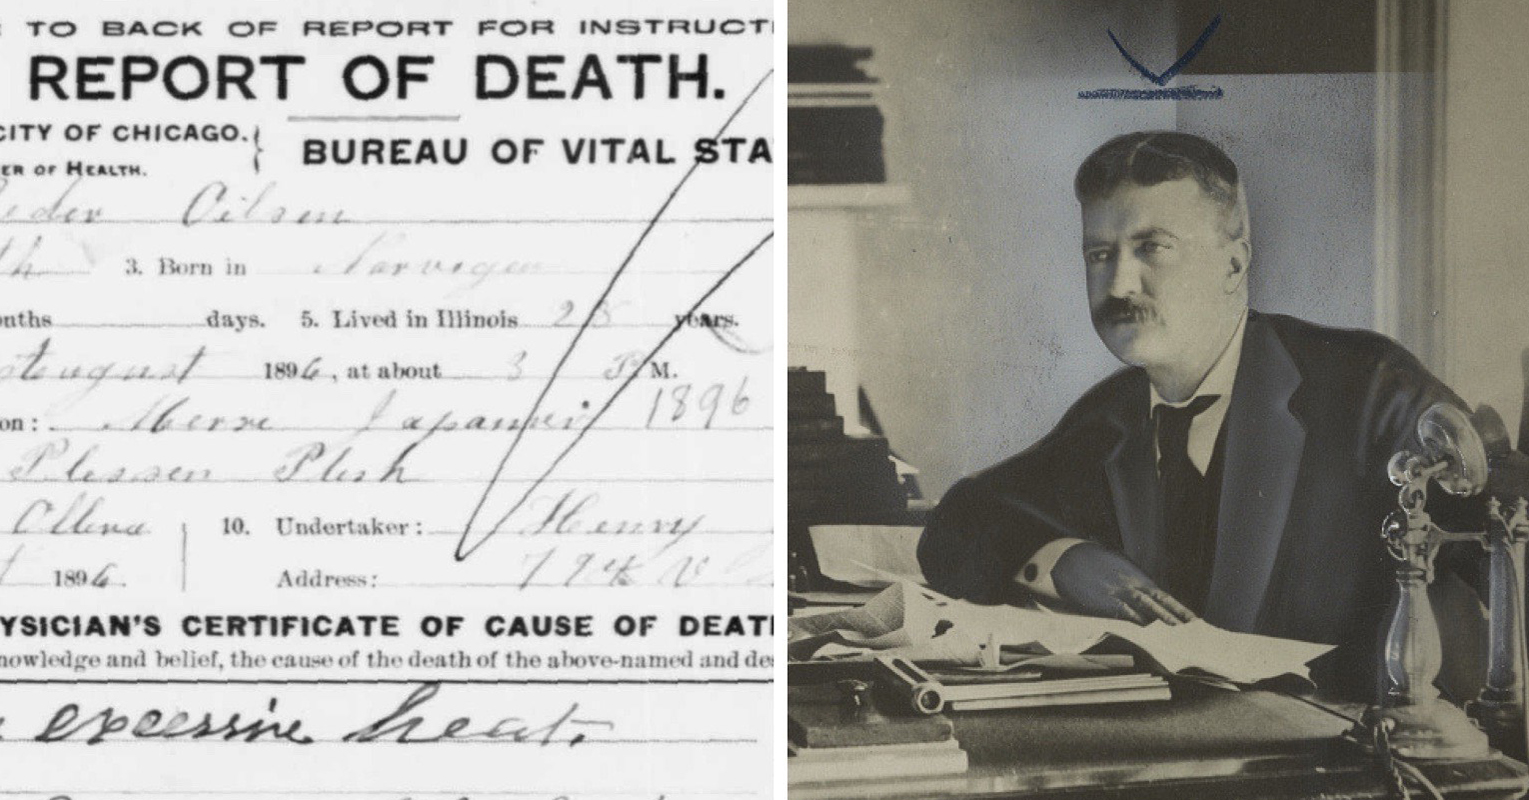 Theodore Roosevelt as NYC police commissioner and death certificate from the 1869 heat wave